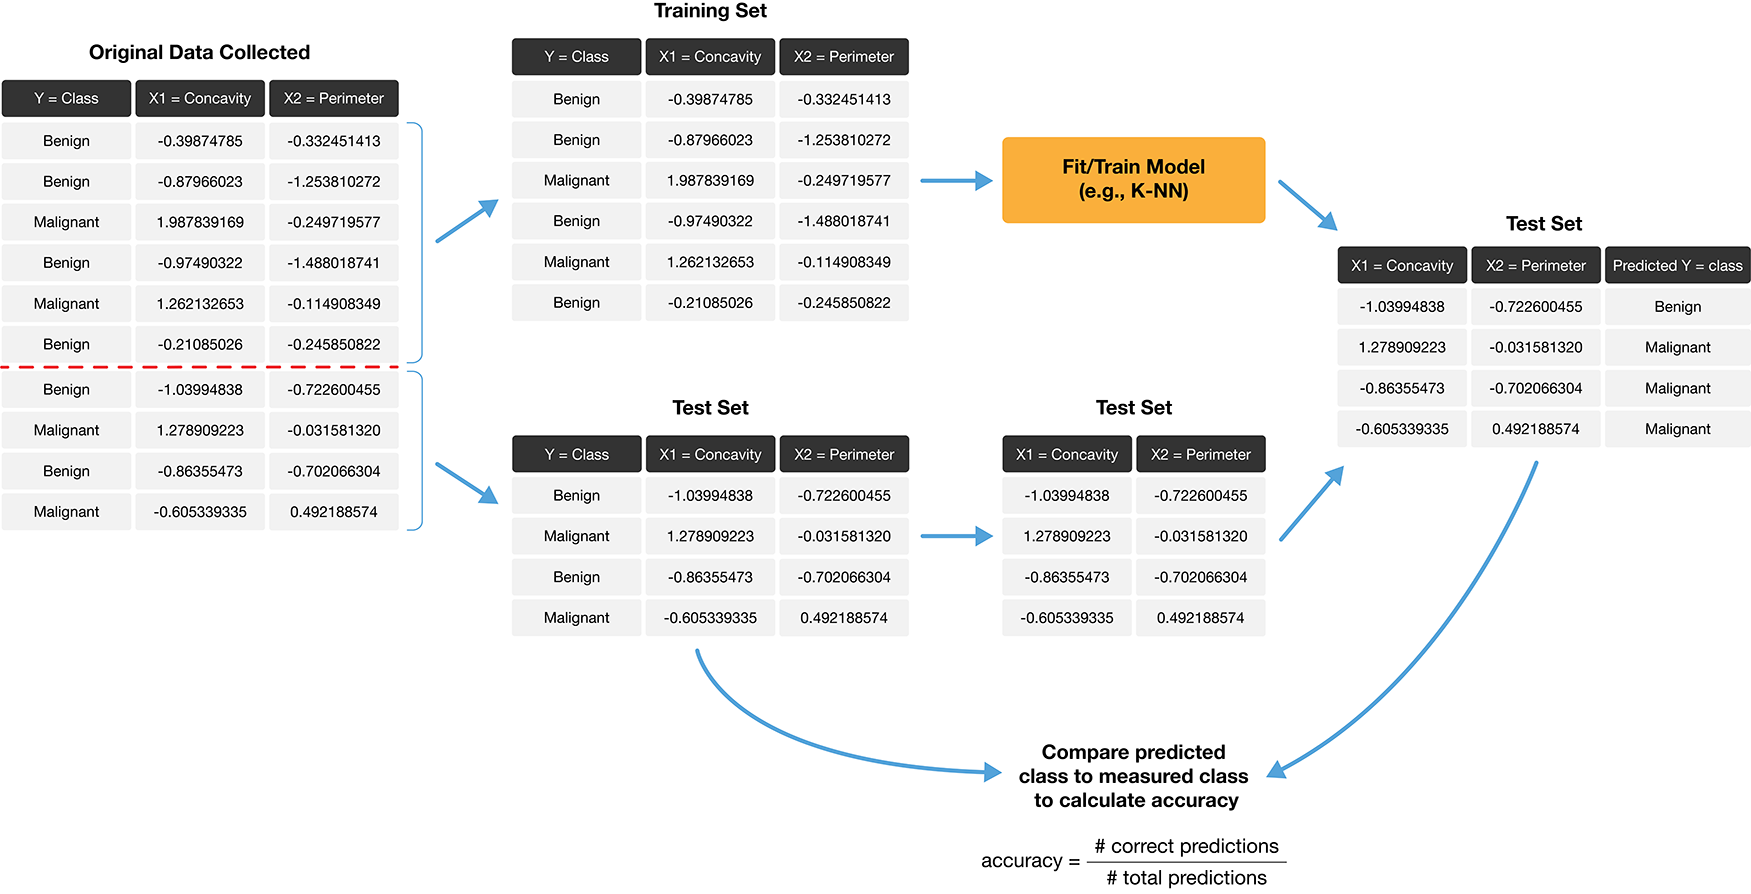 Process for splitting the data and finding the prediction accuracy.